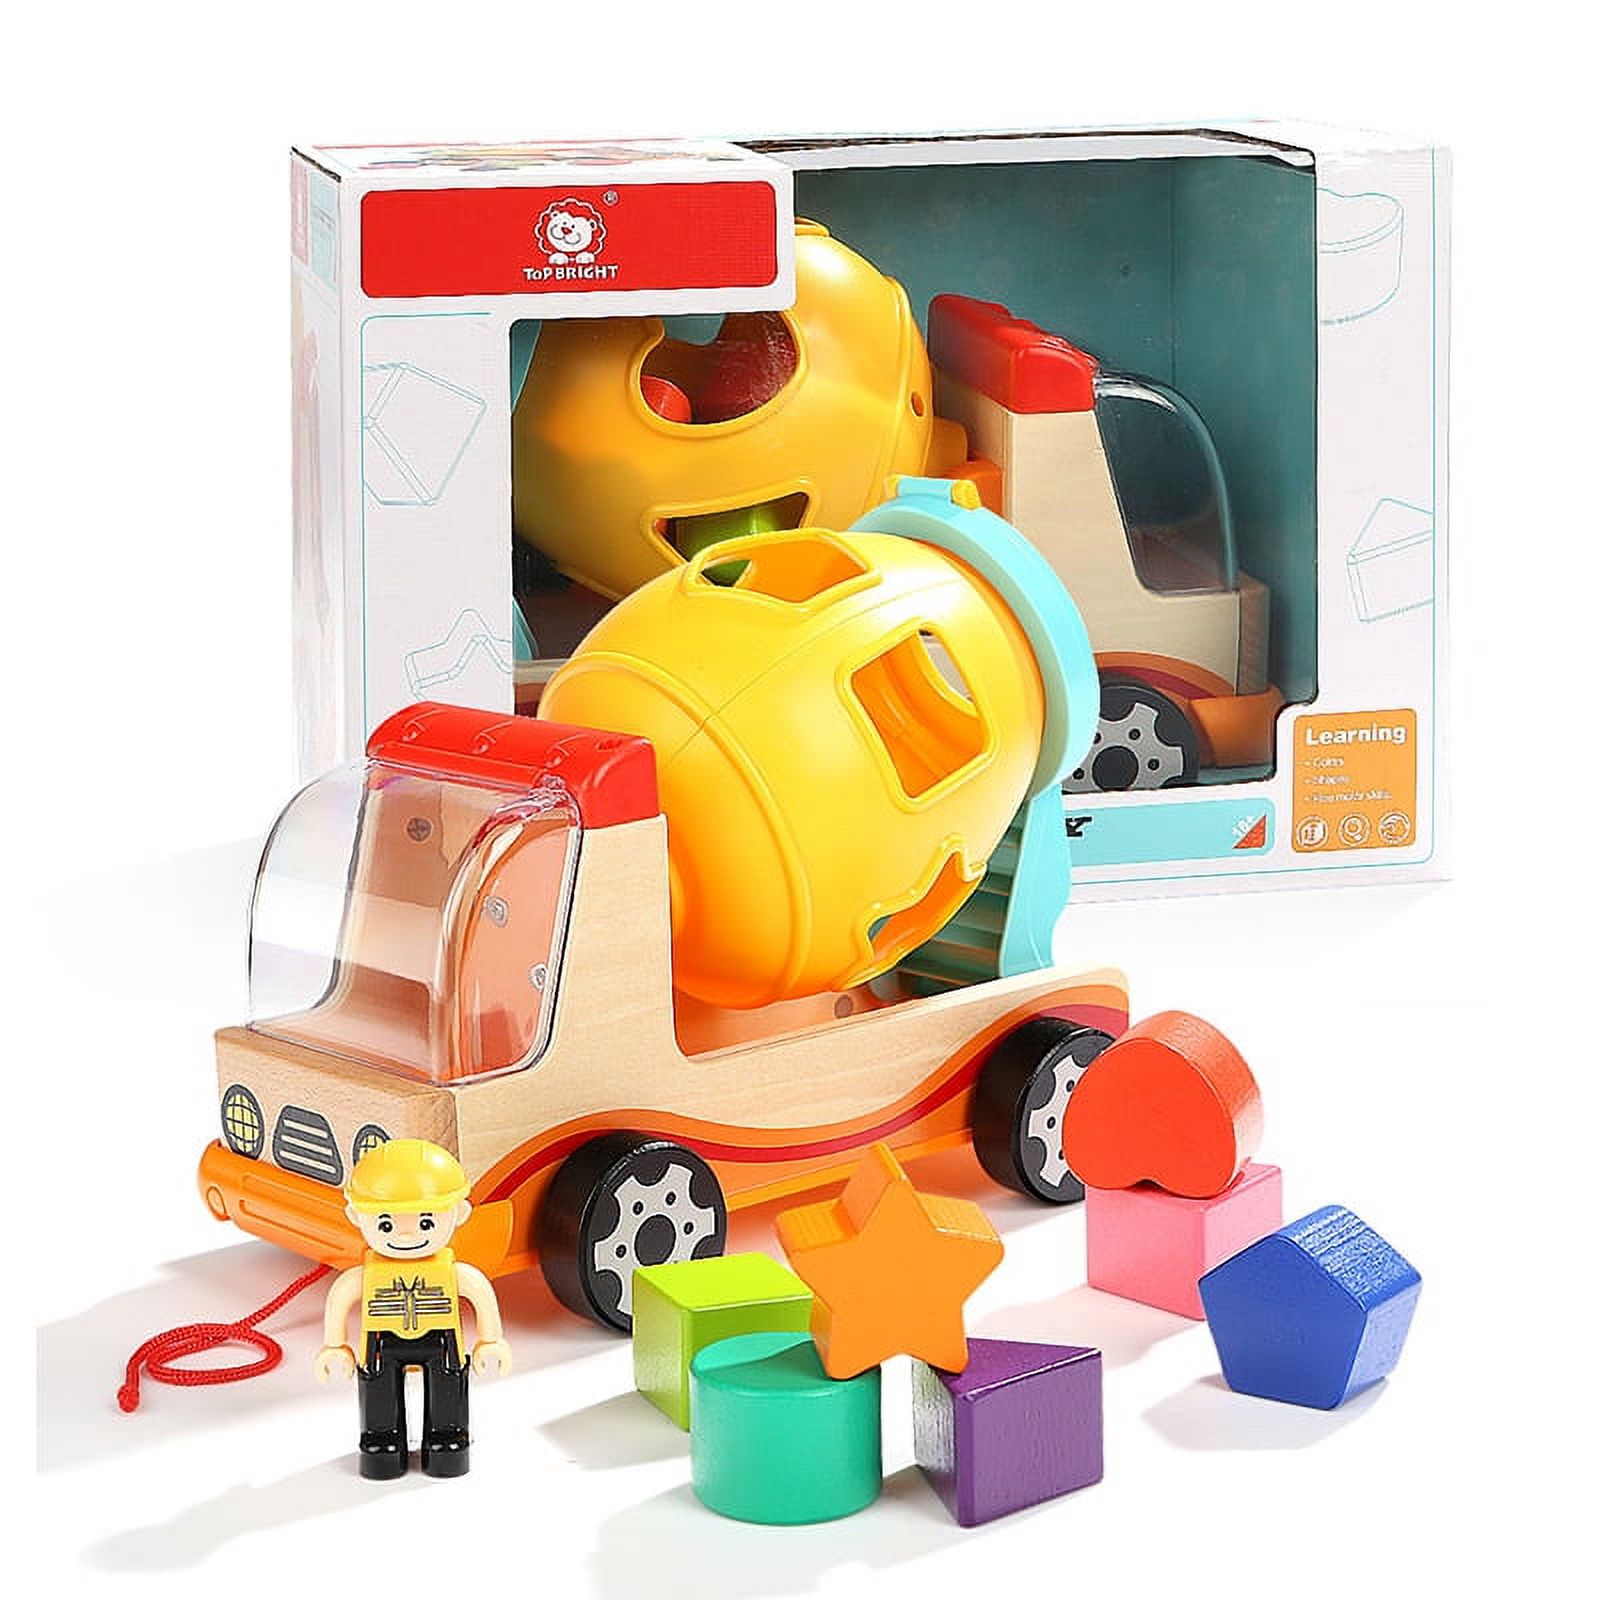 Top Bright - Mixer Truck with Shape Sorter for Toodlers Preschool Learning Toy - image 1 of 6